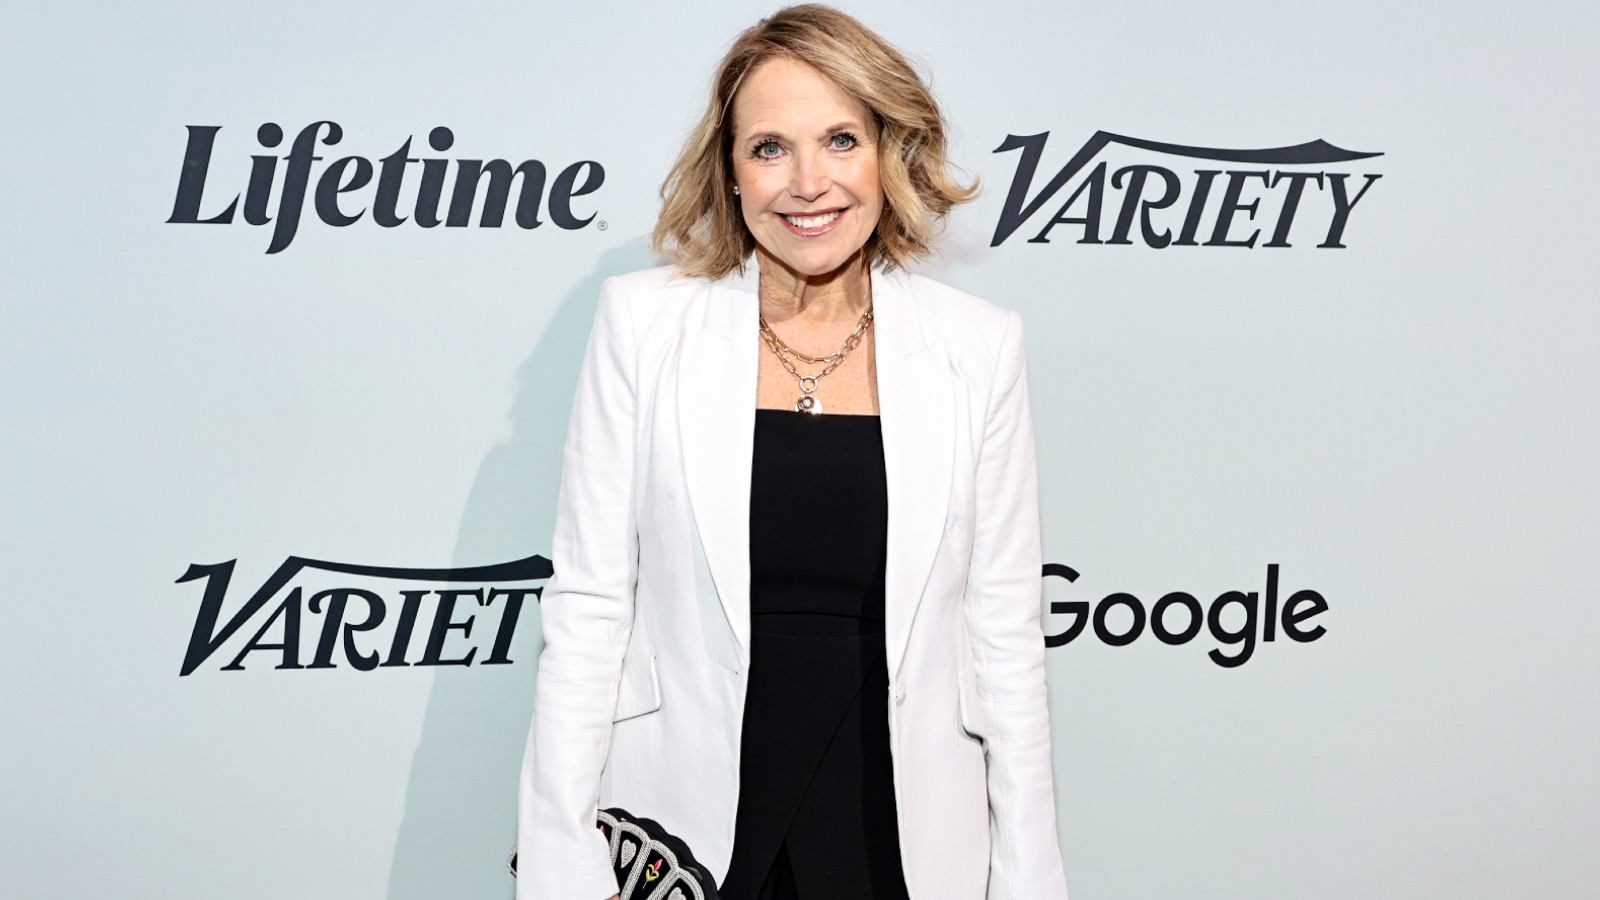 Katie Couric presented by Lifetime at Variety's 2022 Power of Women: New York event on May 05, 2022 at The Glasshouse in New York City.